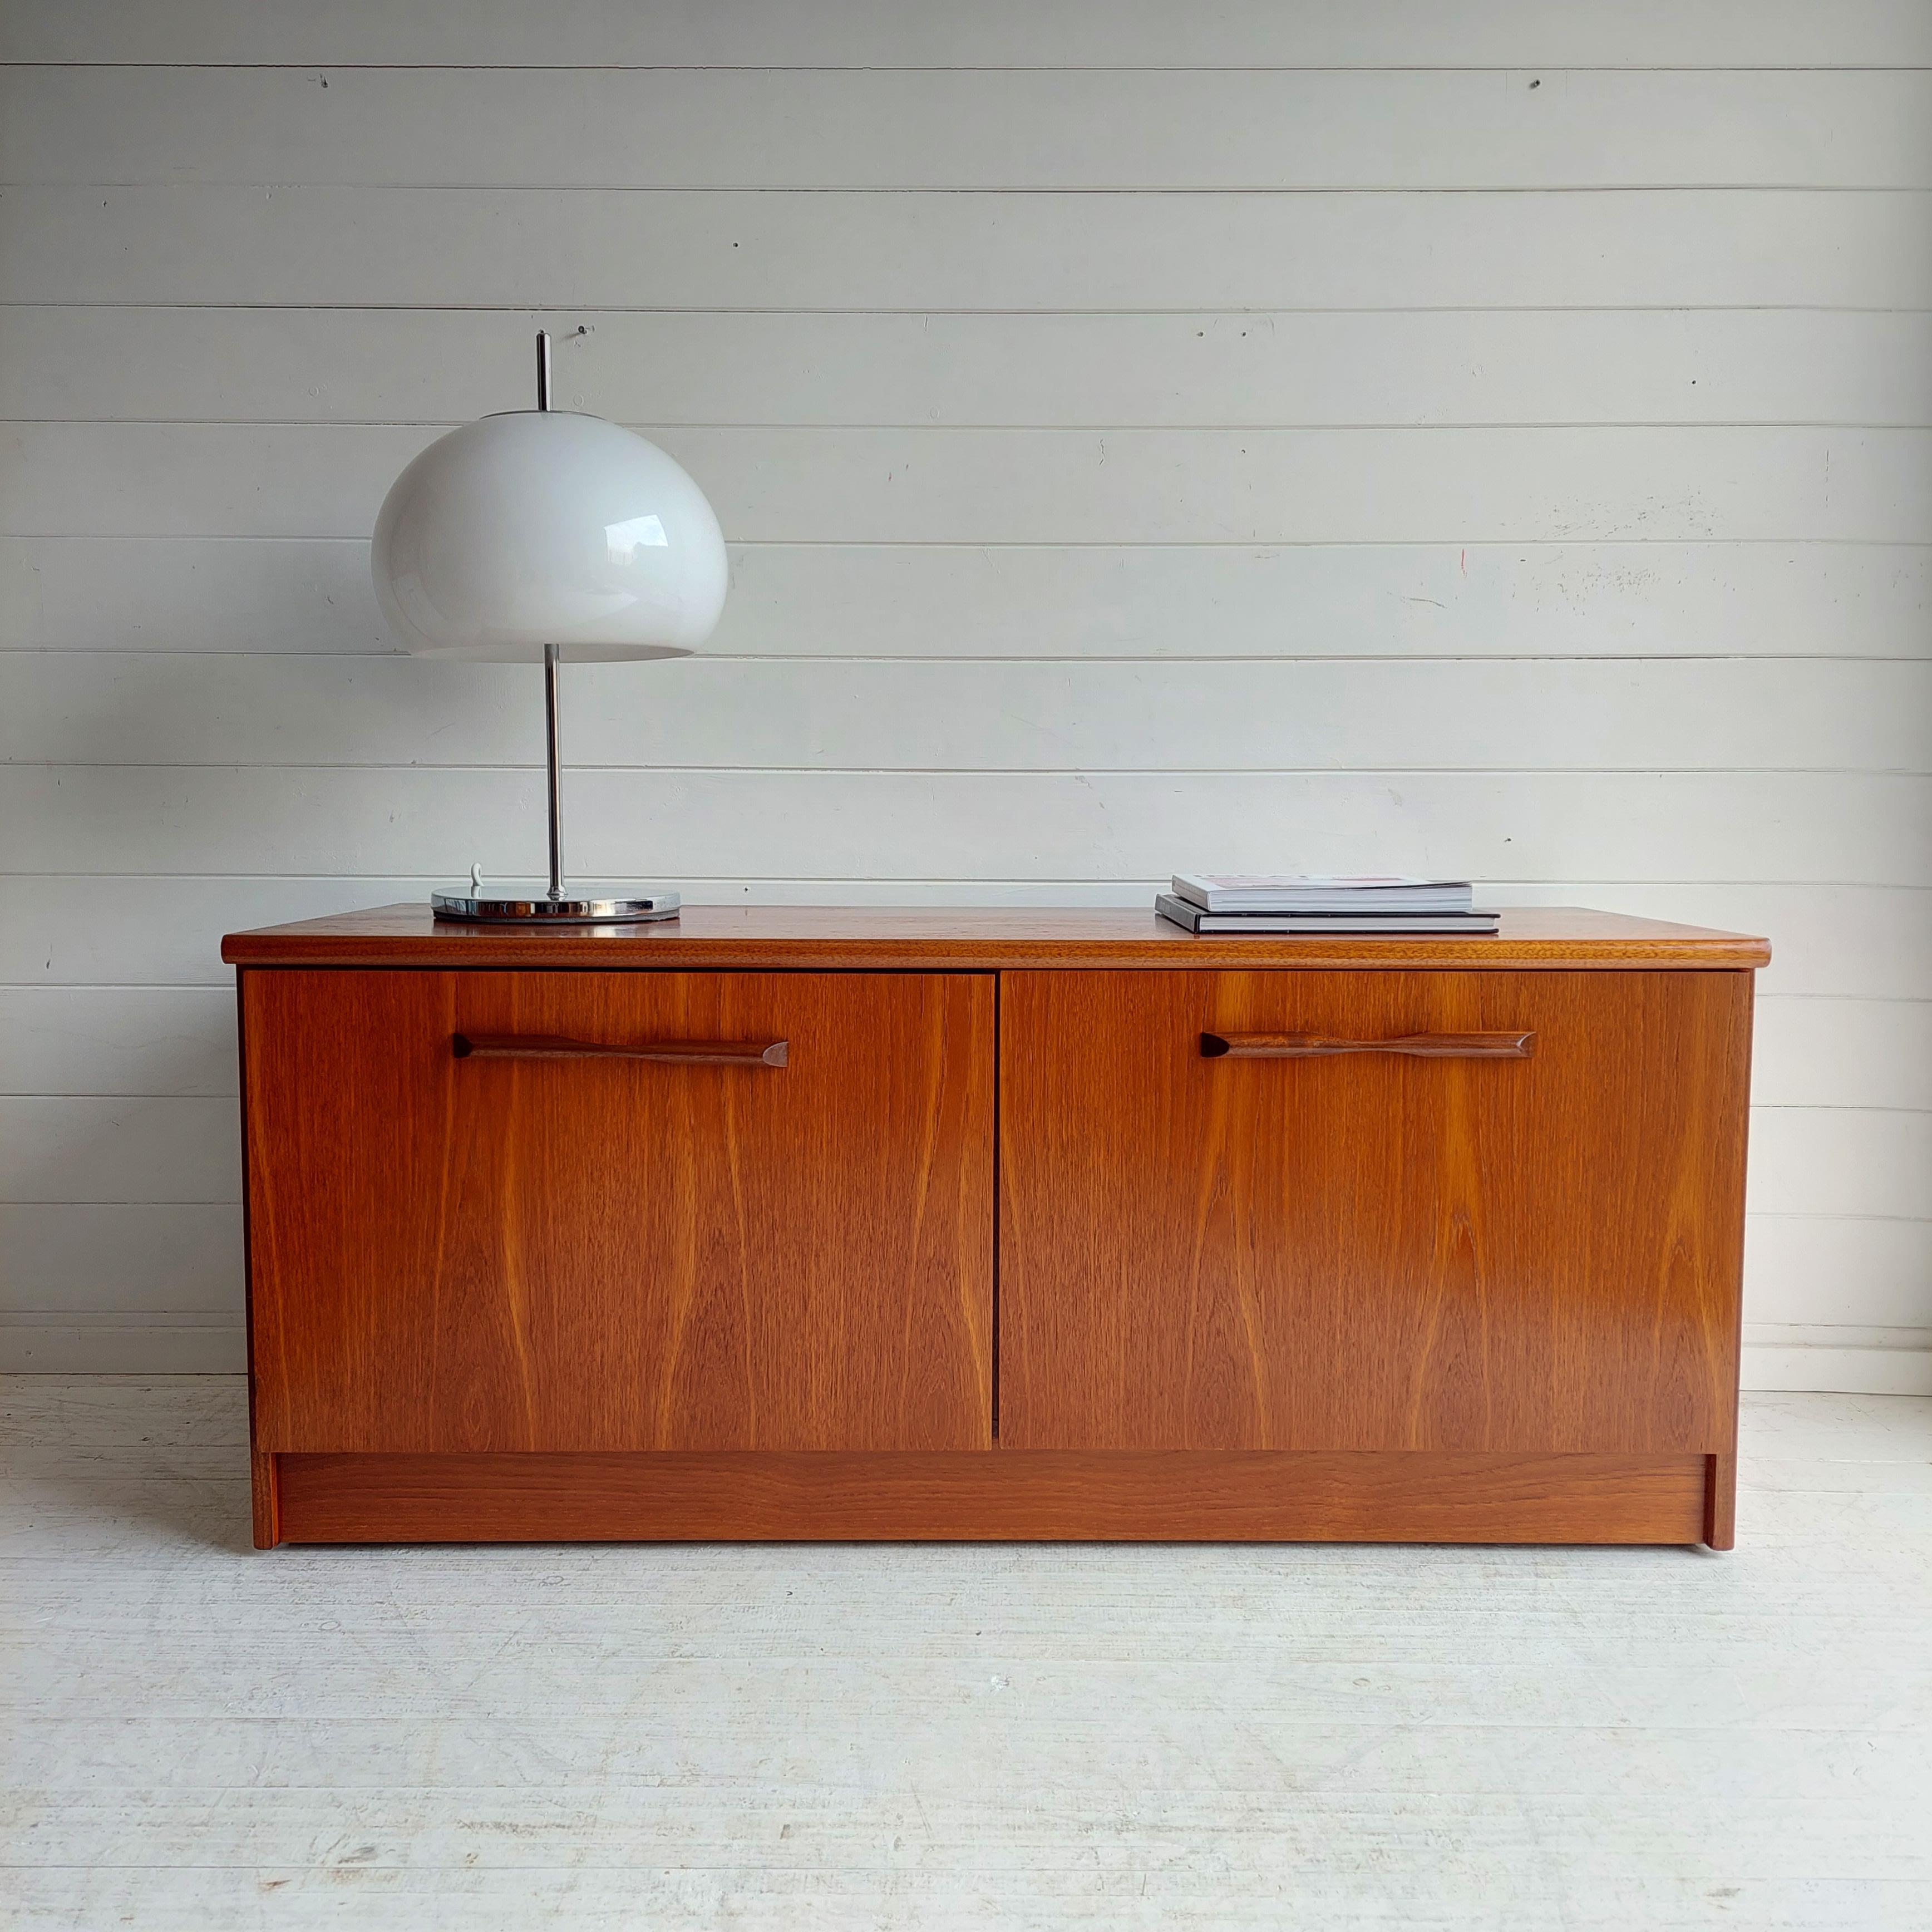 A compact and low Danish style sideboard dating back to the 1960s in teak and excellent restored condition.

There is plenty of storage with a large open section, two large doors reveal an   storage area perfect for any purpose..

A super cabinet